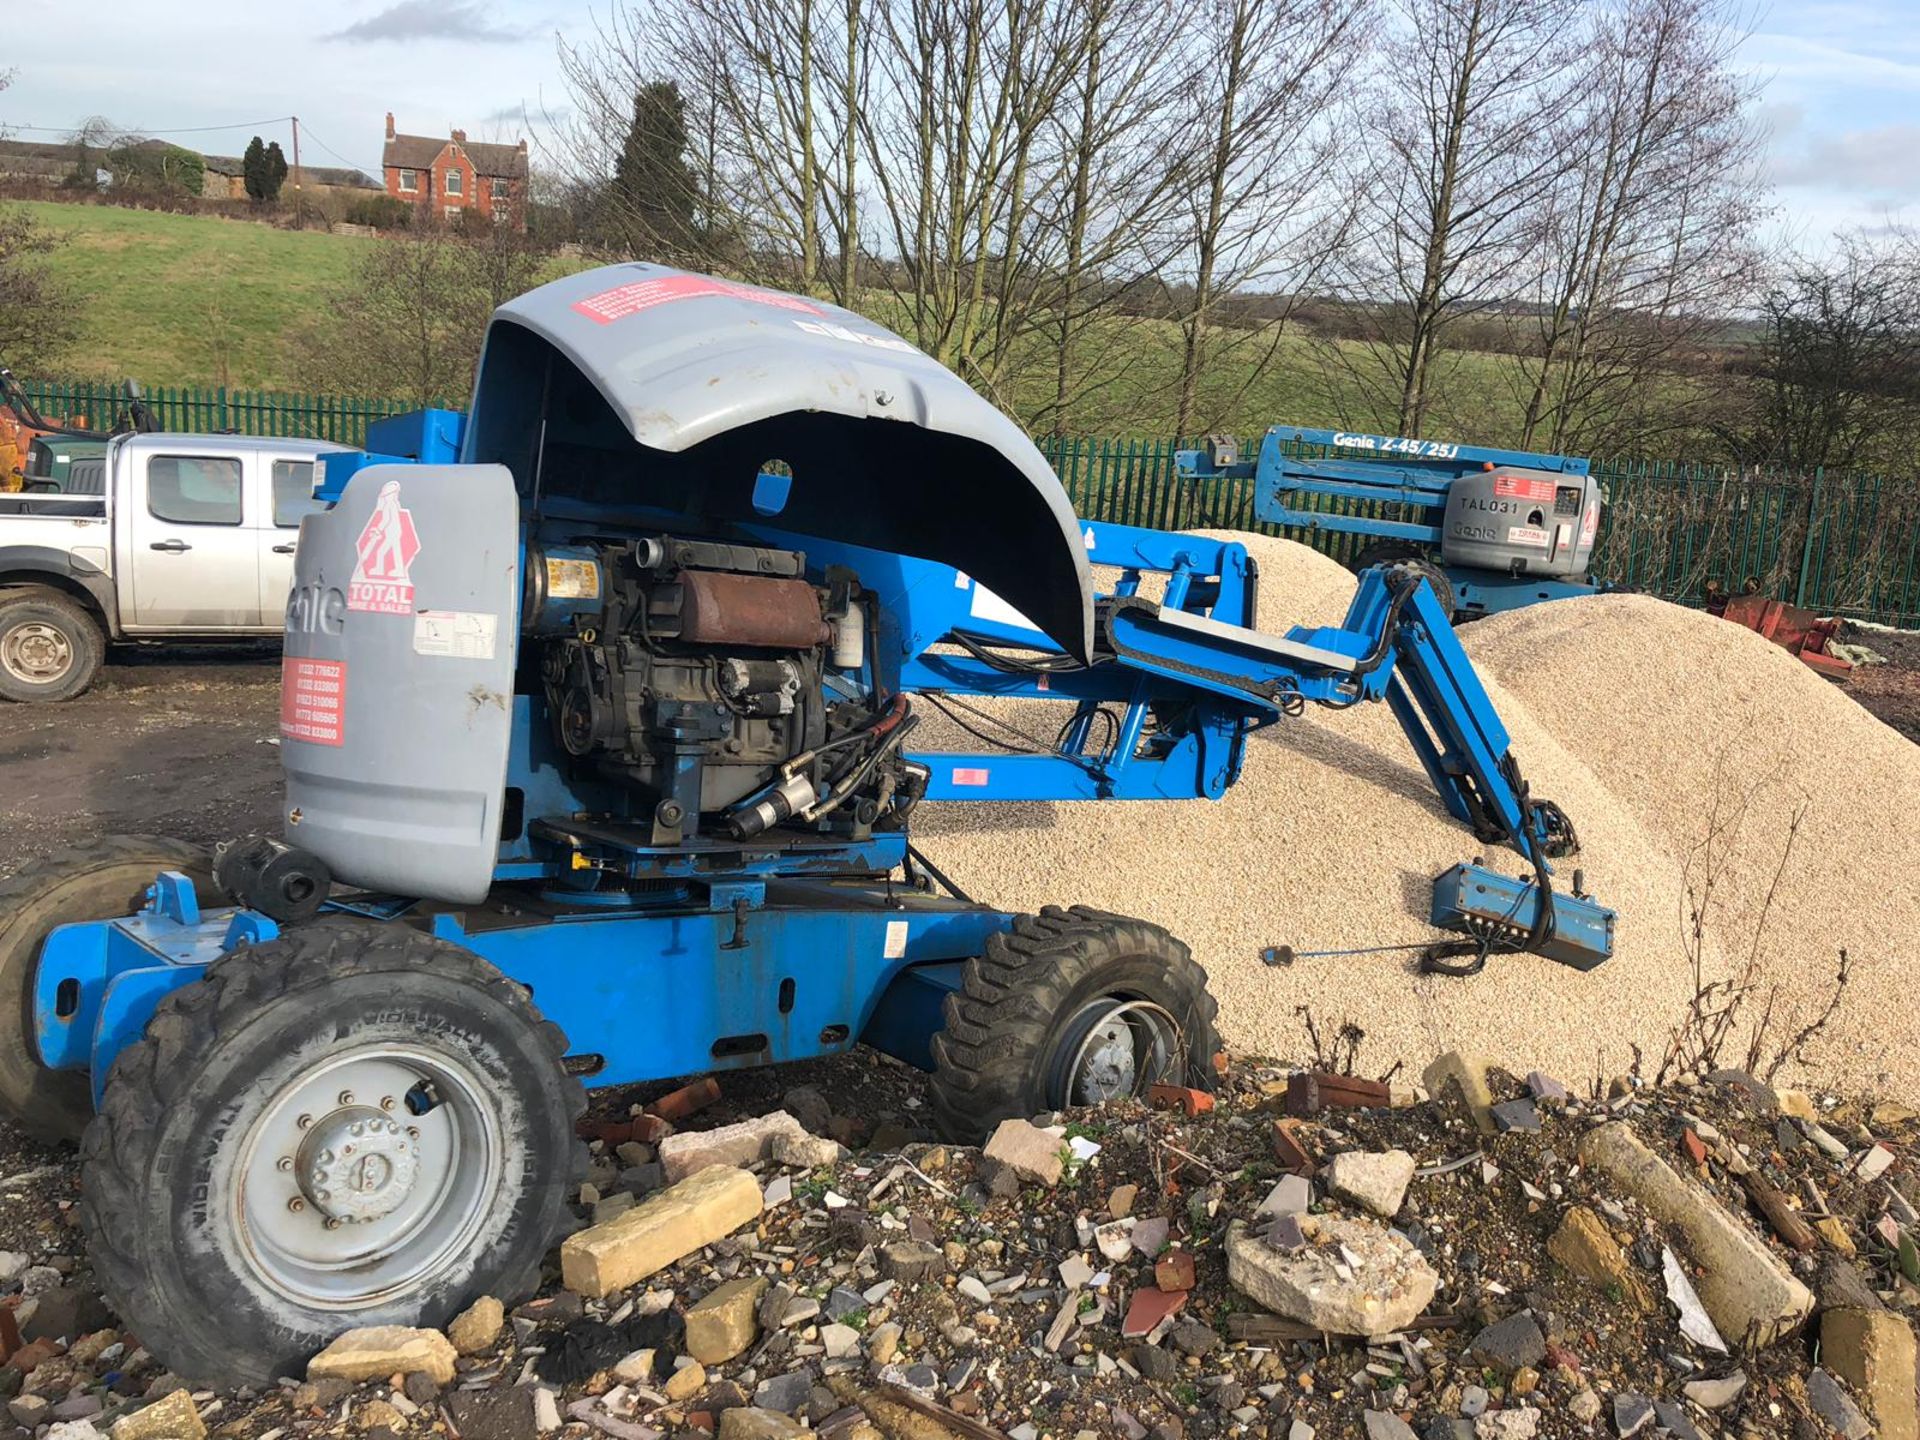 TWO 2 X GENIE BOOM LIFTS MODEL Z45 - 25J 4X4, YEAR 2001 SELLING AS SPARES / REPAIRS *PLUS VAT* - Image 4 of 8